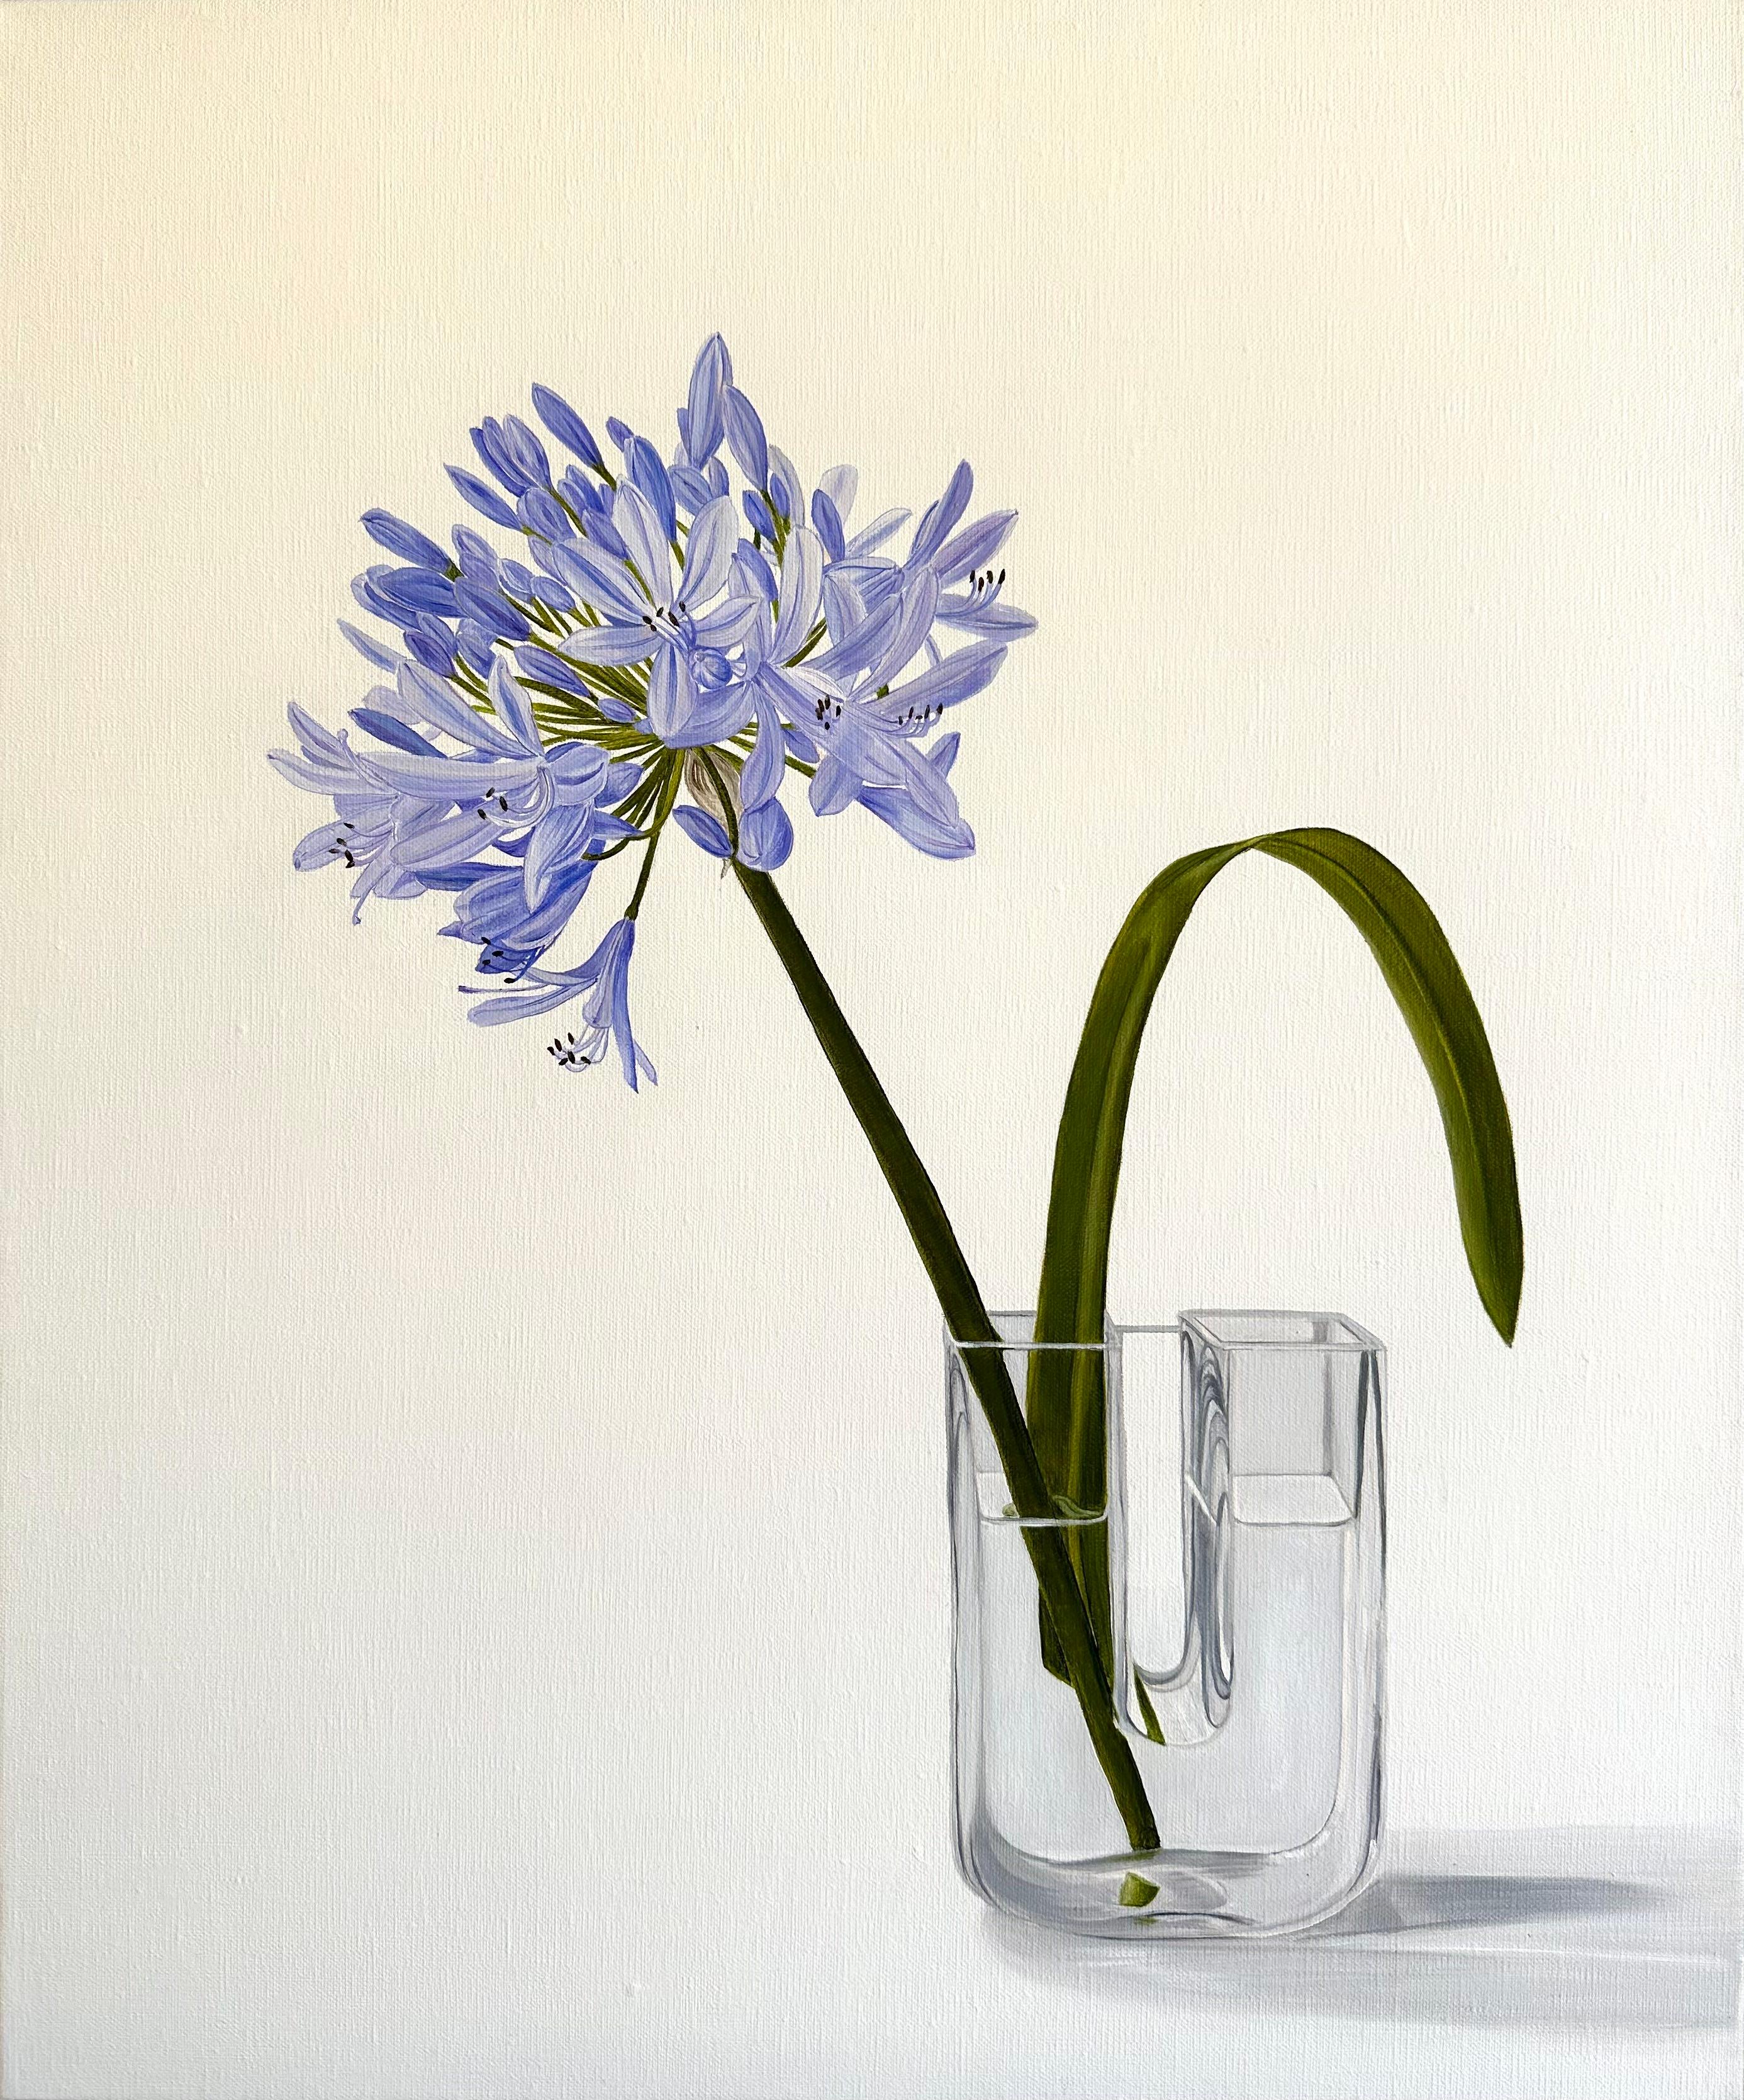 Original Botanical Oil Painting by Tarn McLean.
The Agapanthus flower is native to South Africa and has been painted with lifelike colours of blues, violets and cool greens, placed in a vintage Swedish Boda U-shaped vase. The work is reductive in